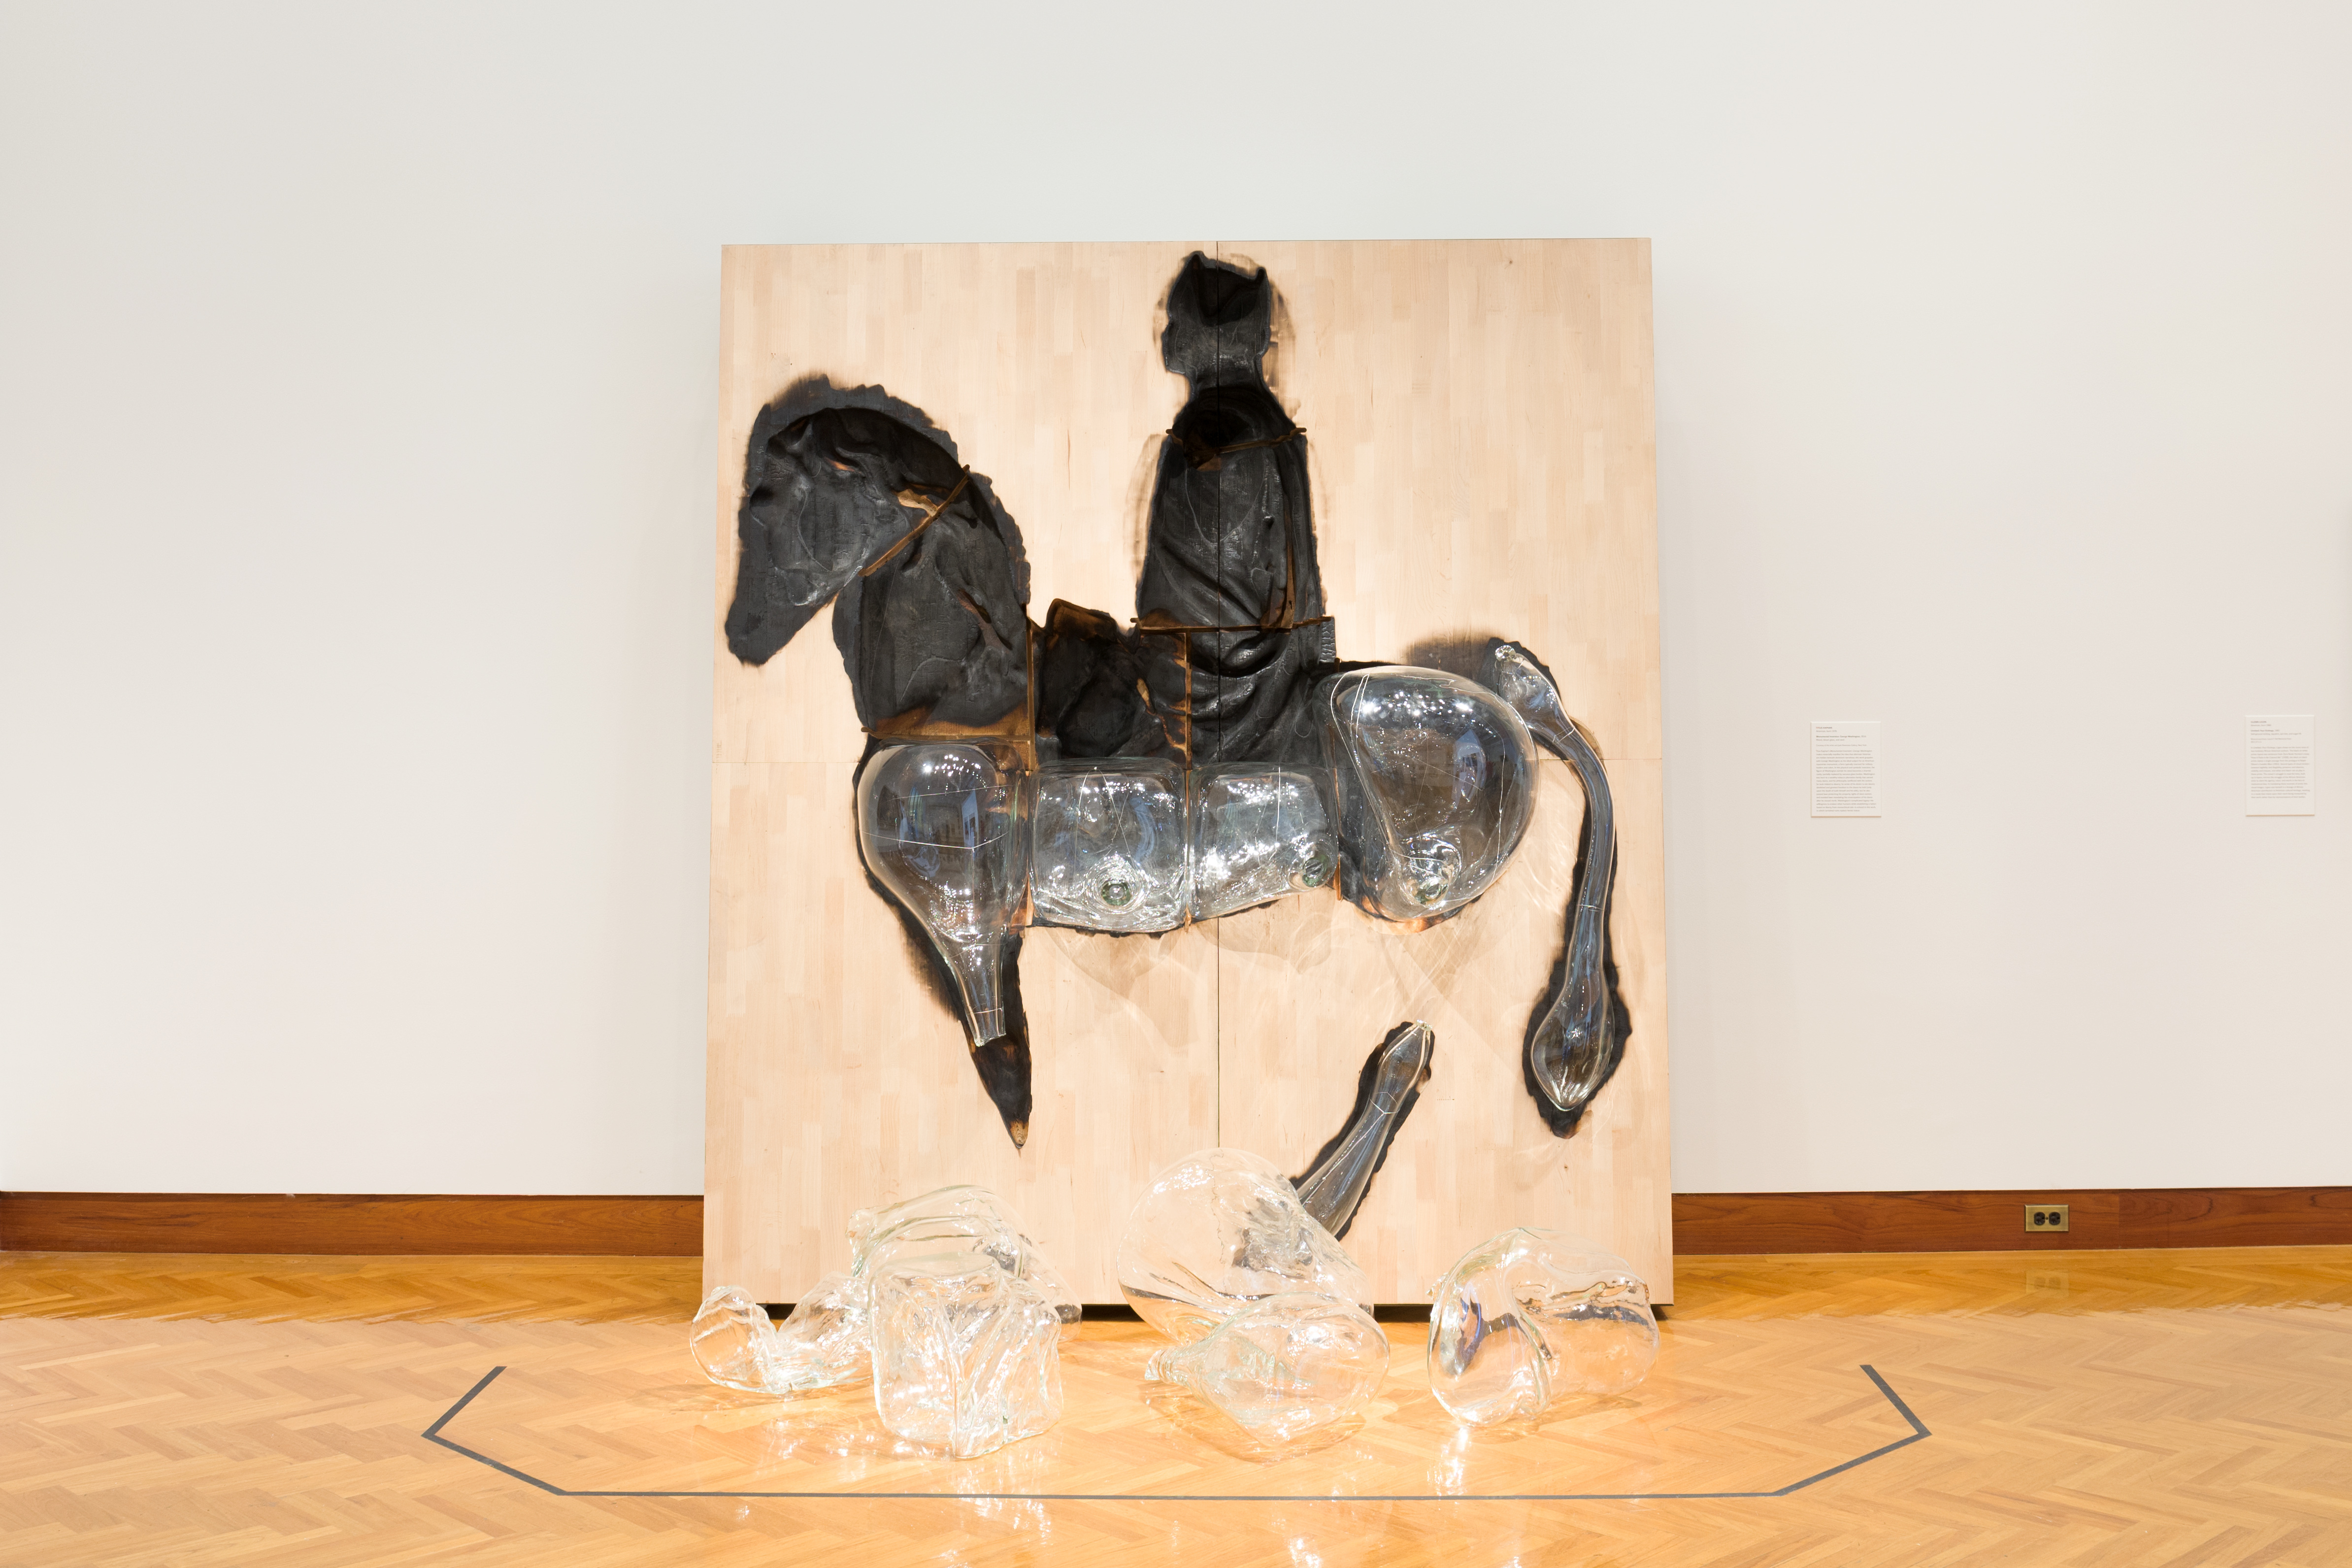 Titus: A large flat piece of wood rests against a wall in a gallery space. A figure of a man riding a horse is charred into the wood. Glass rests in the lower half of the charred spaces while on the floor of the gallery remains the upper portion of the horse and man.